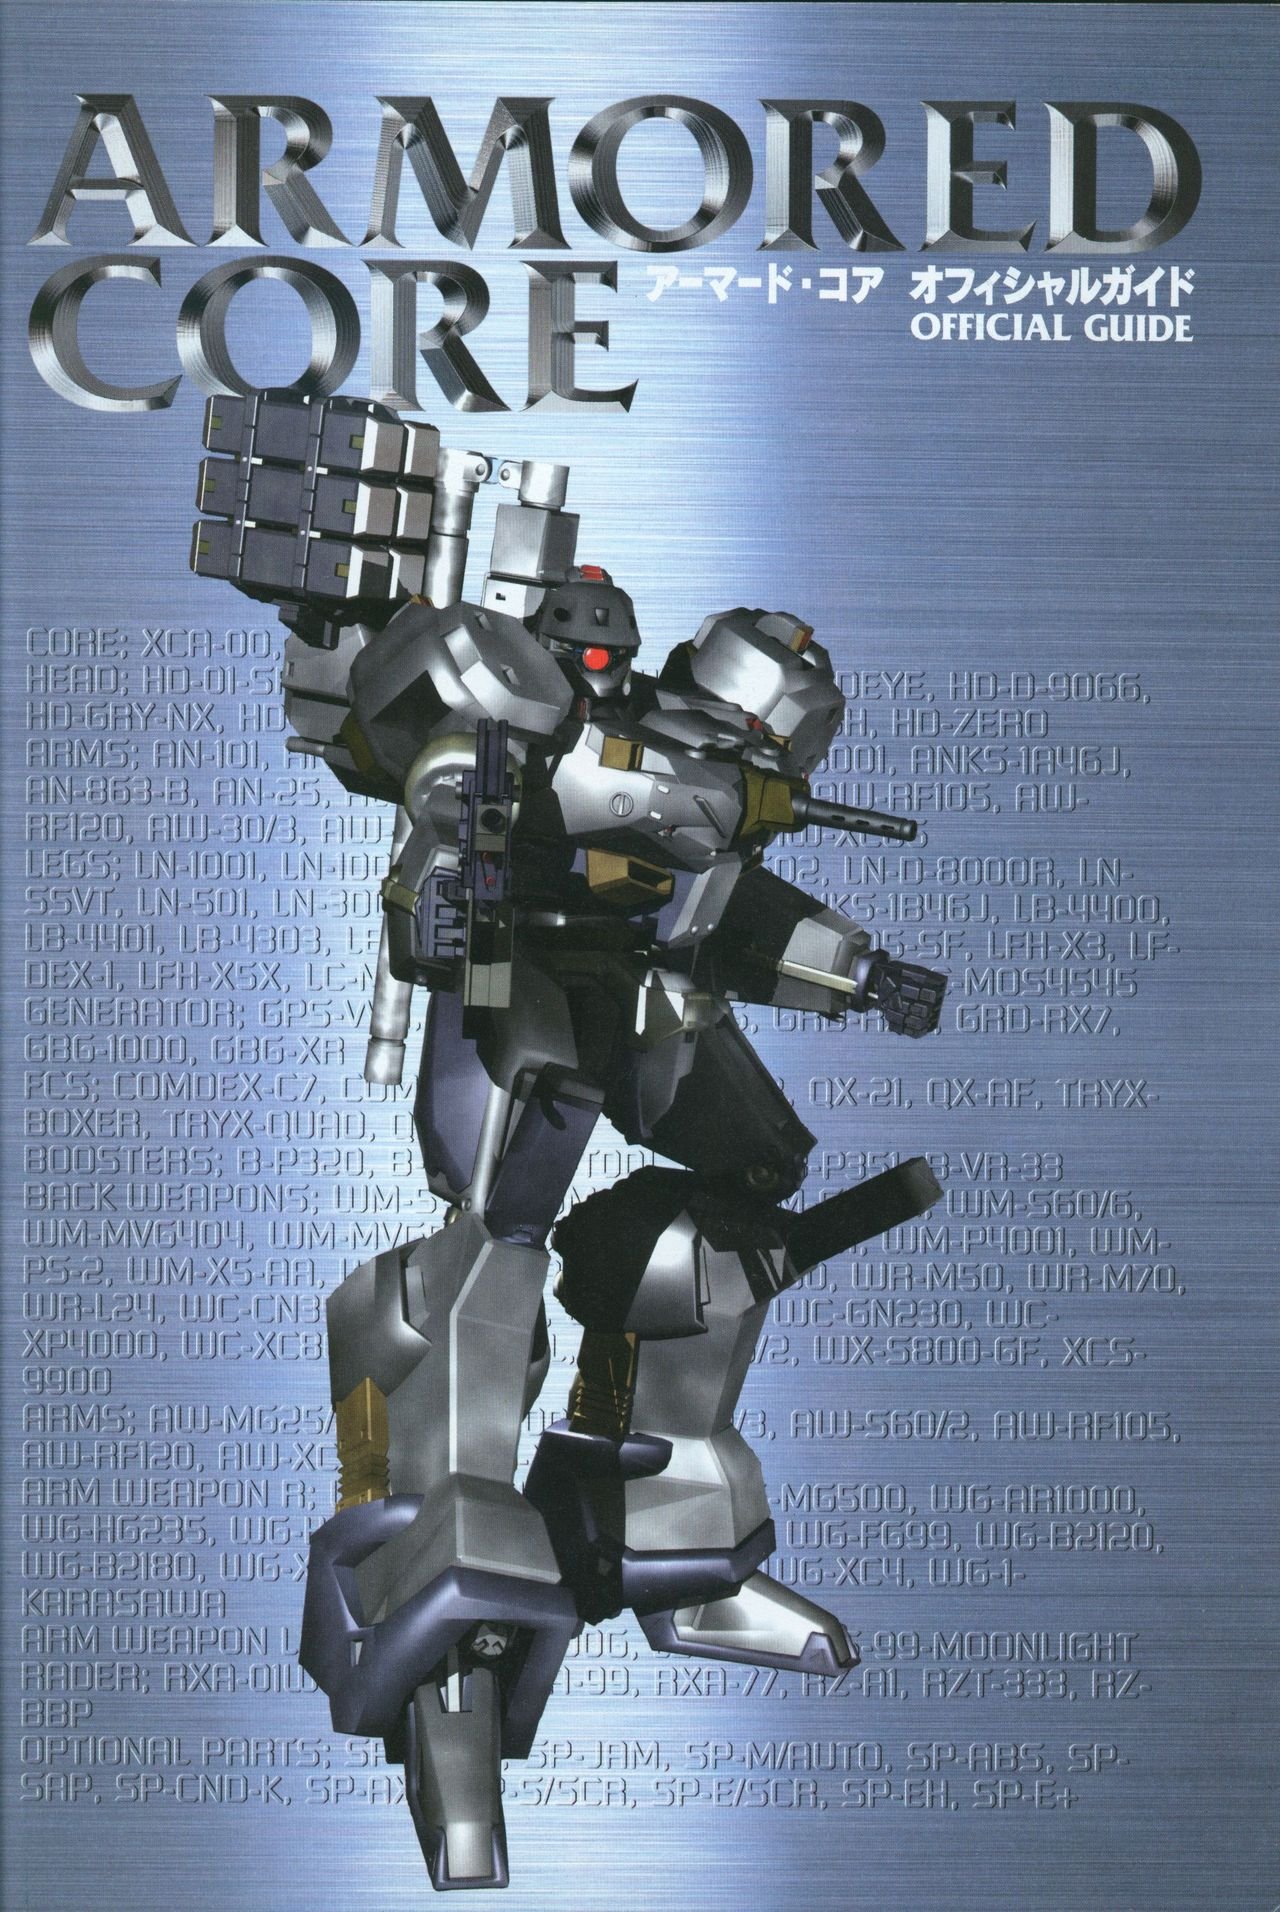 Hellhound 13th Ac Anfang Cg Render From Armored Core Official Guide Armoredcore アーマードコア T Co Rdurtbb8sh Twitter